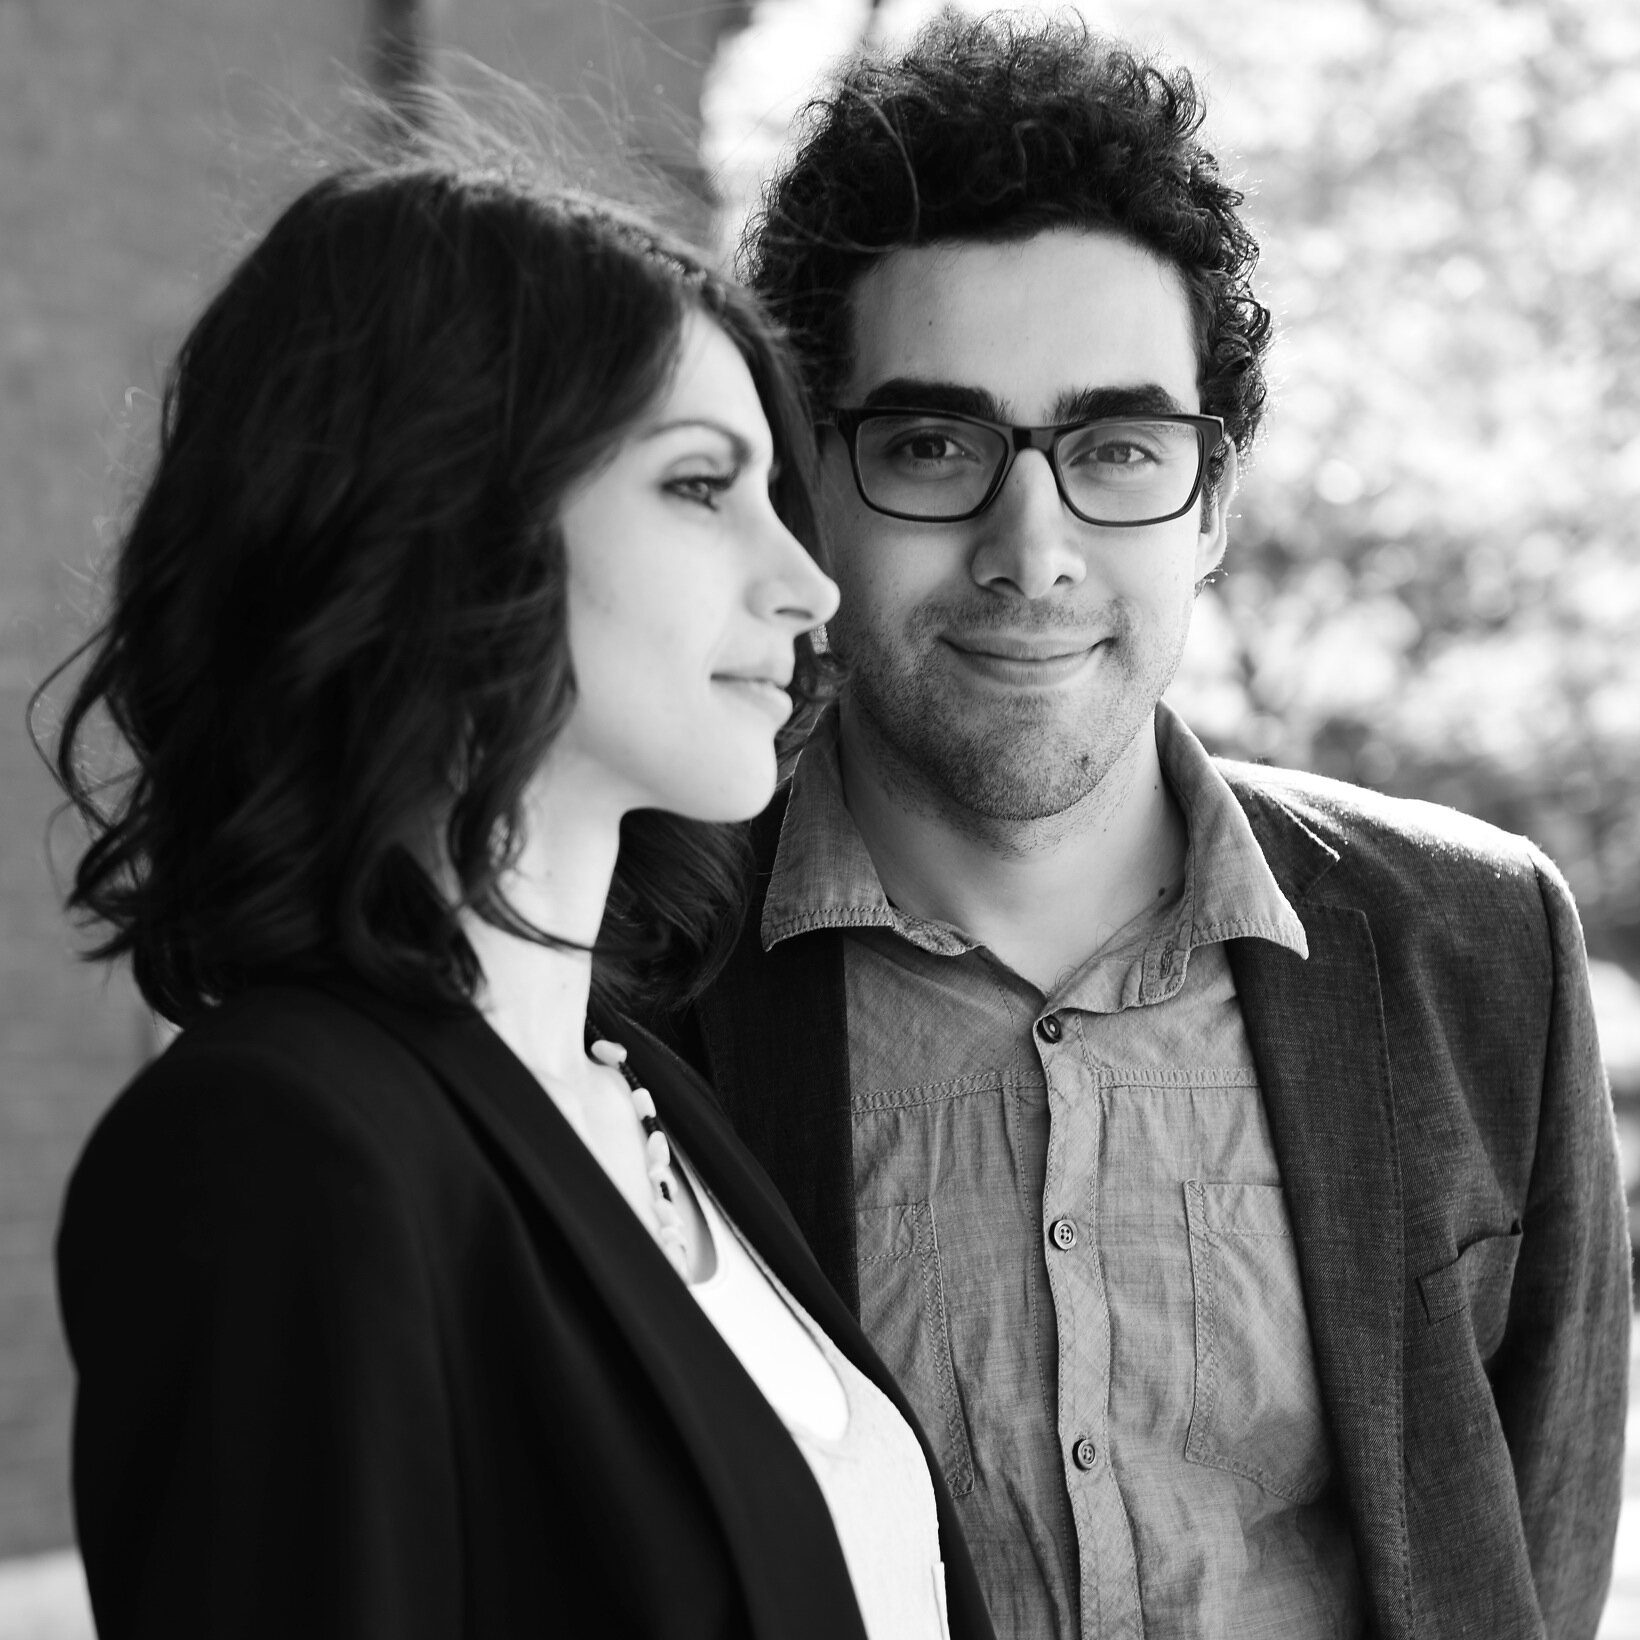 The Pillars is a band created by two Berklee College of Music Alumni: Alejandro Ramirez Cisneros and Cristina Vaira and it promotes the power of teamwork